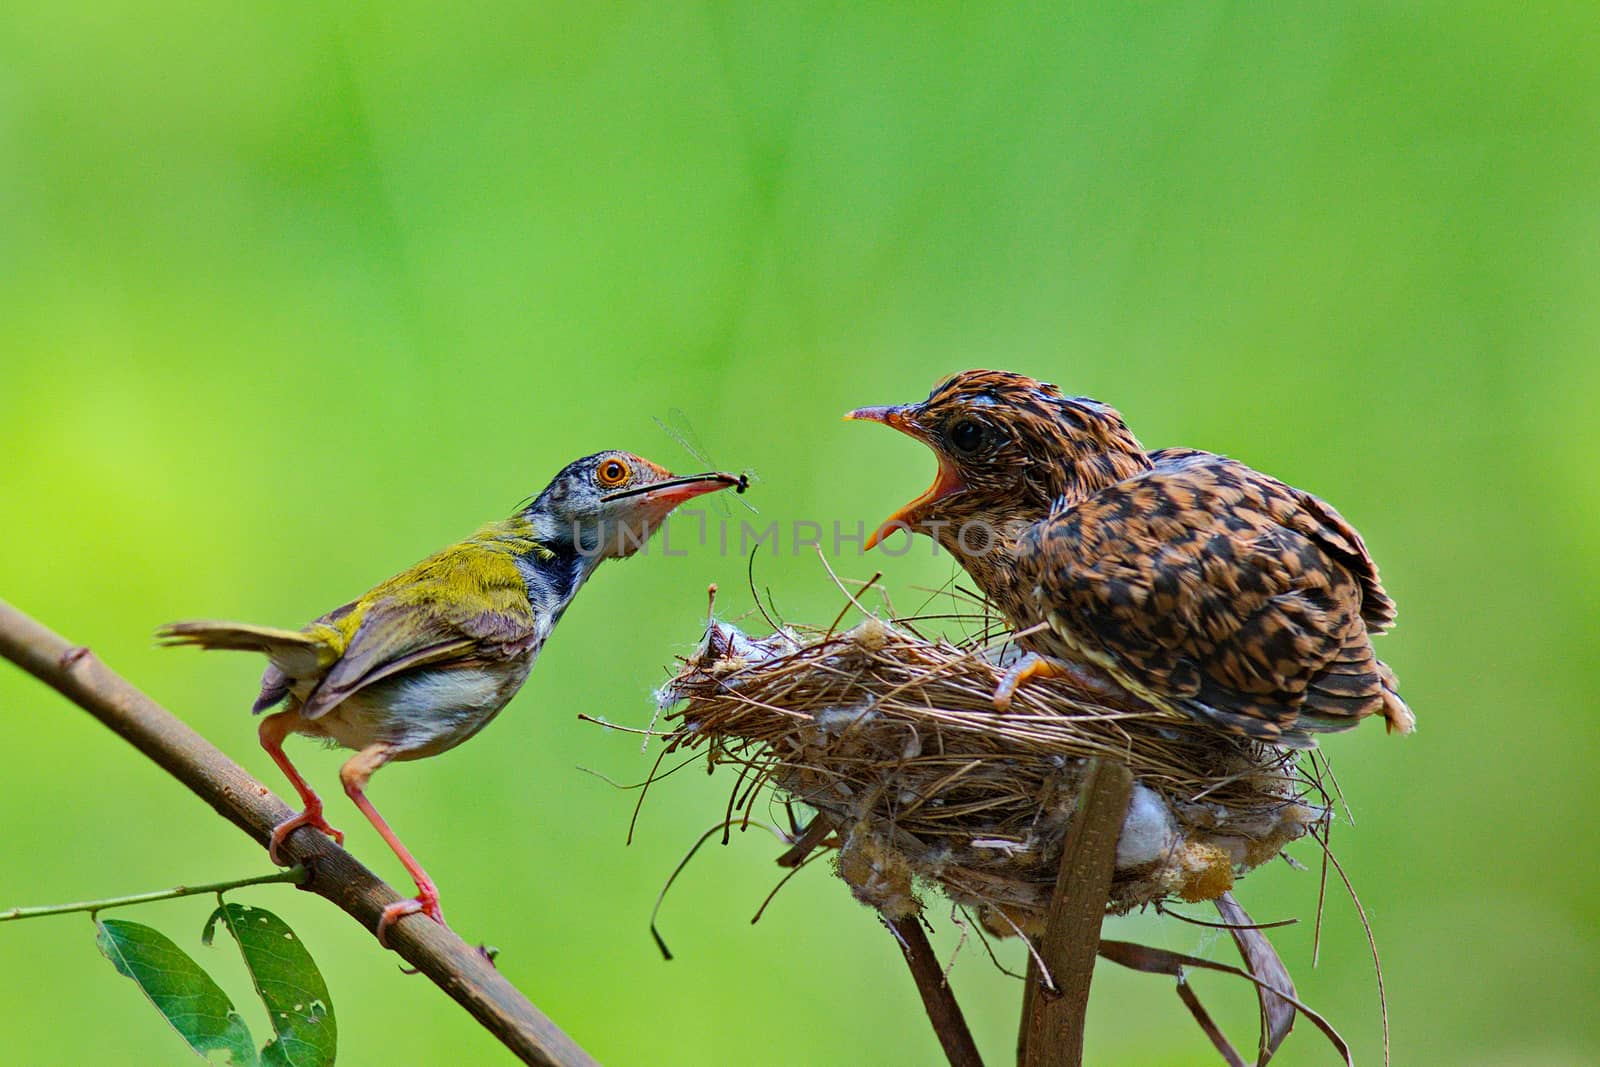 A Song thrush mother feeding her hungry chicks in the nest